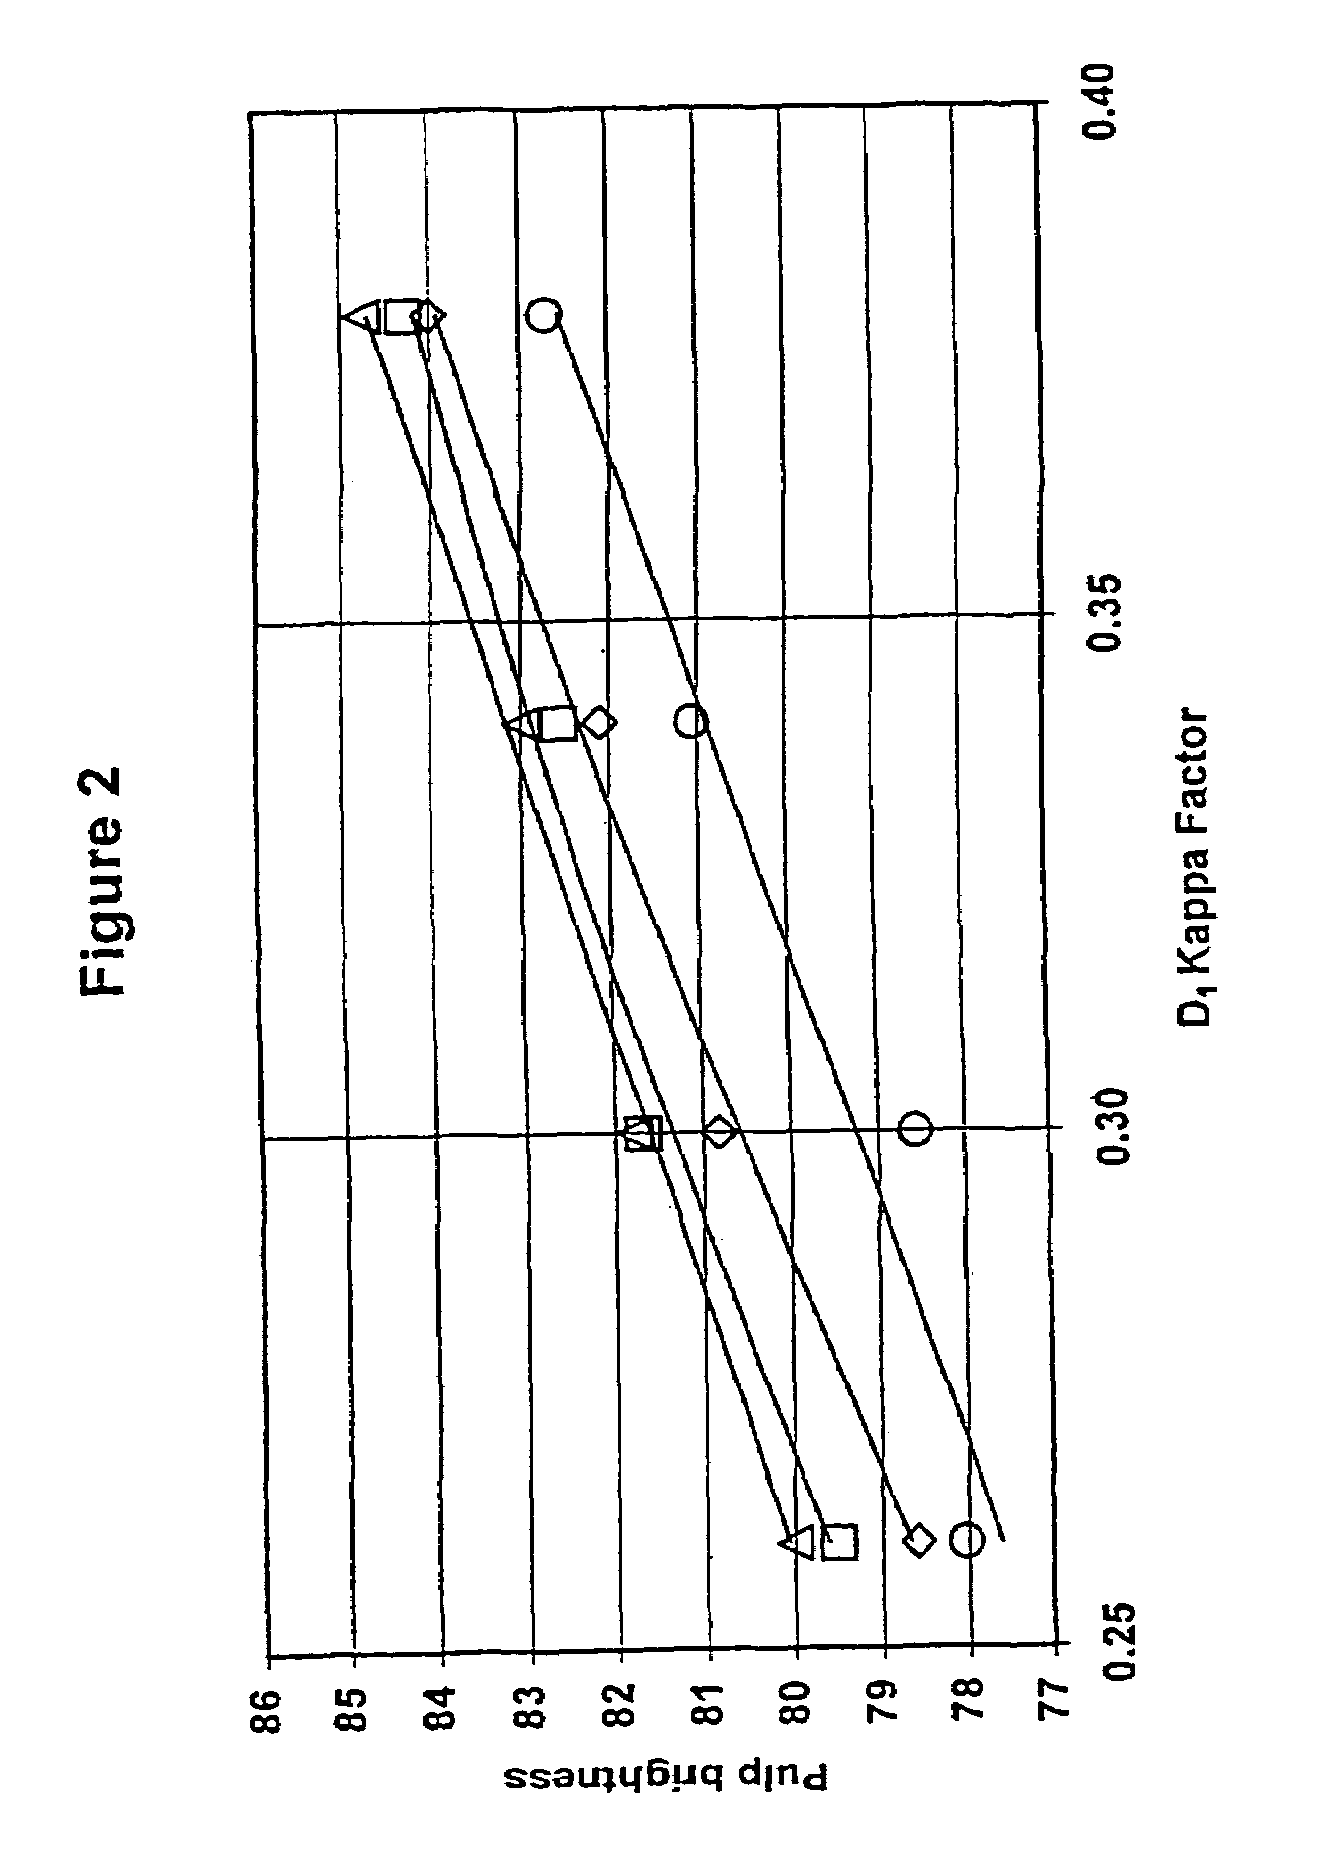 Method of xylanase treatment in a chlorine dioxide bleaching sequence